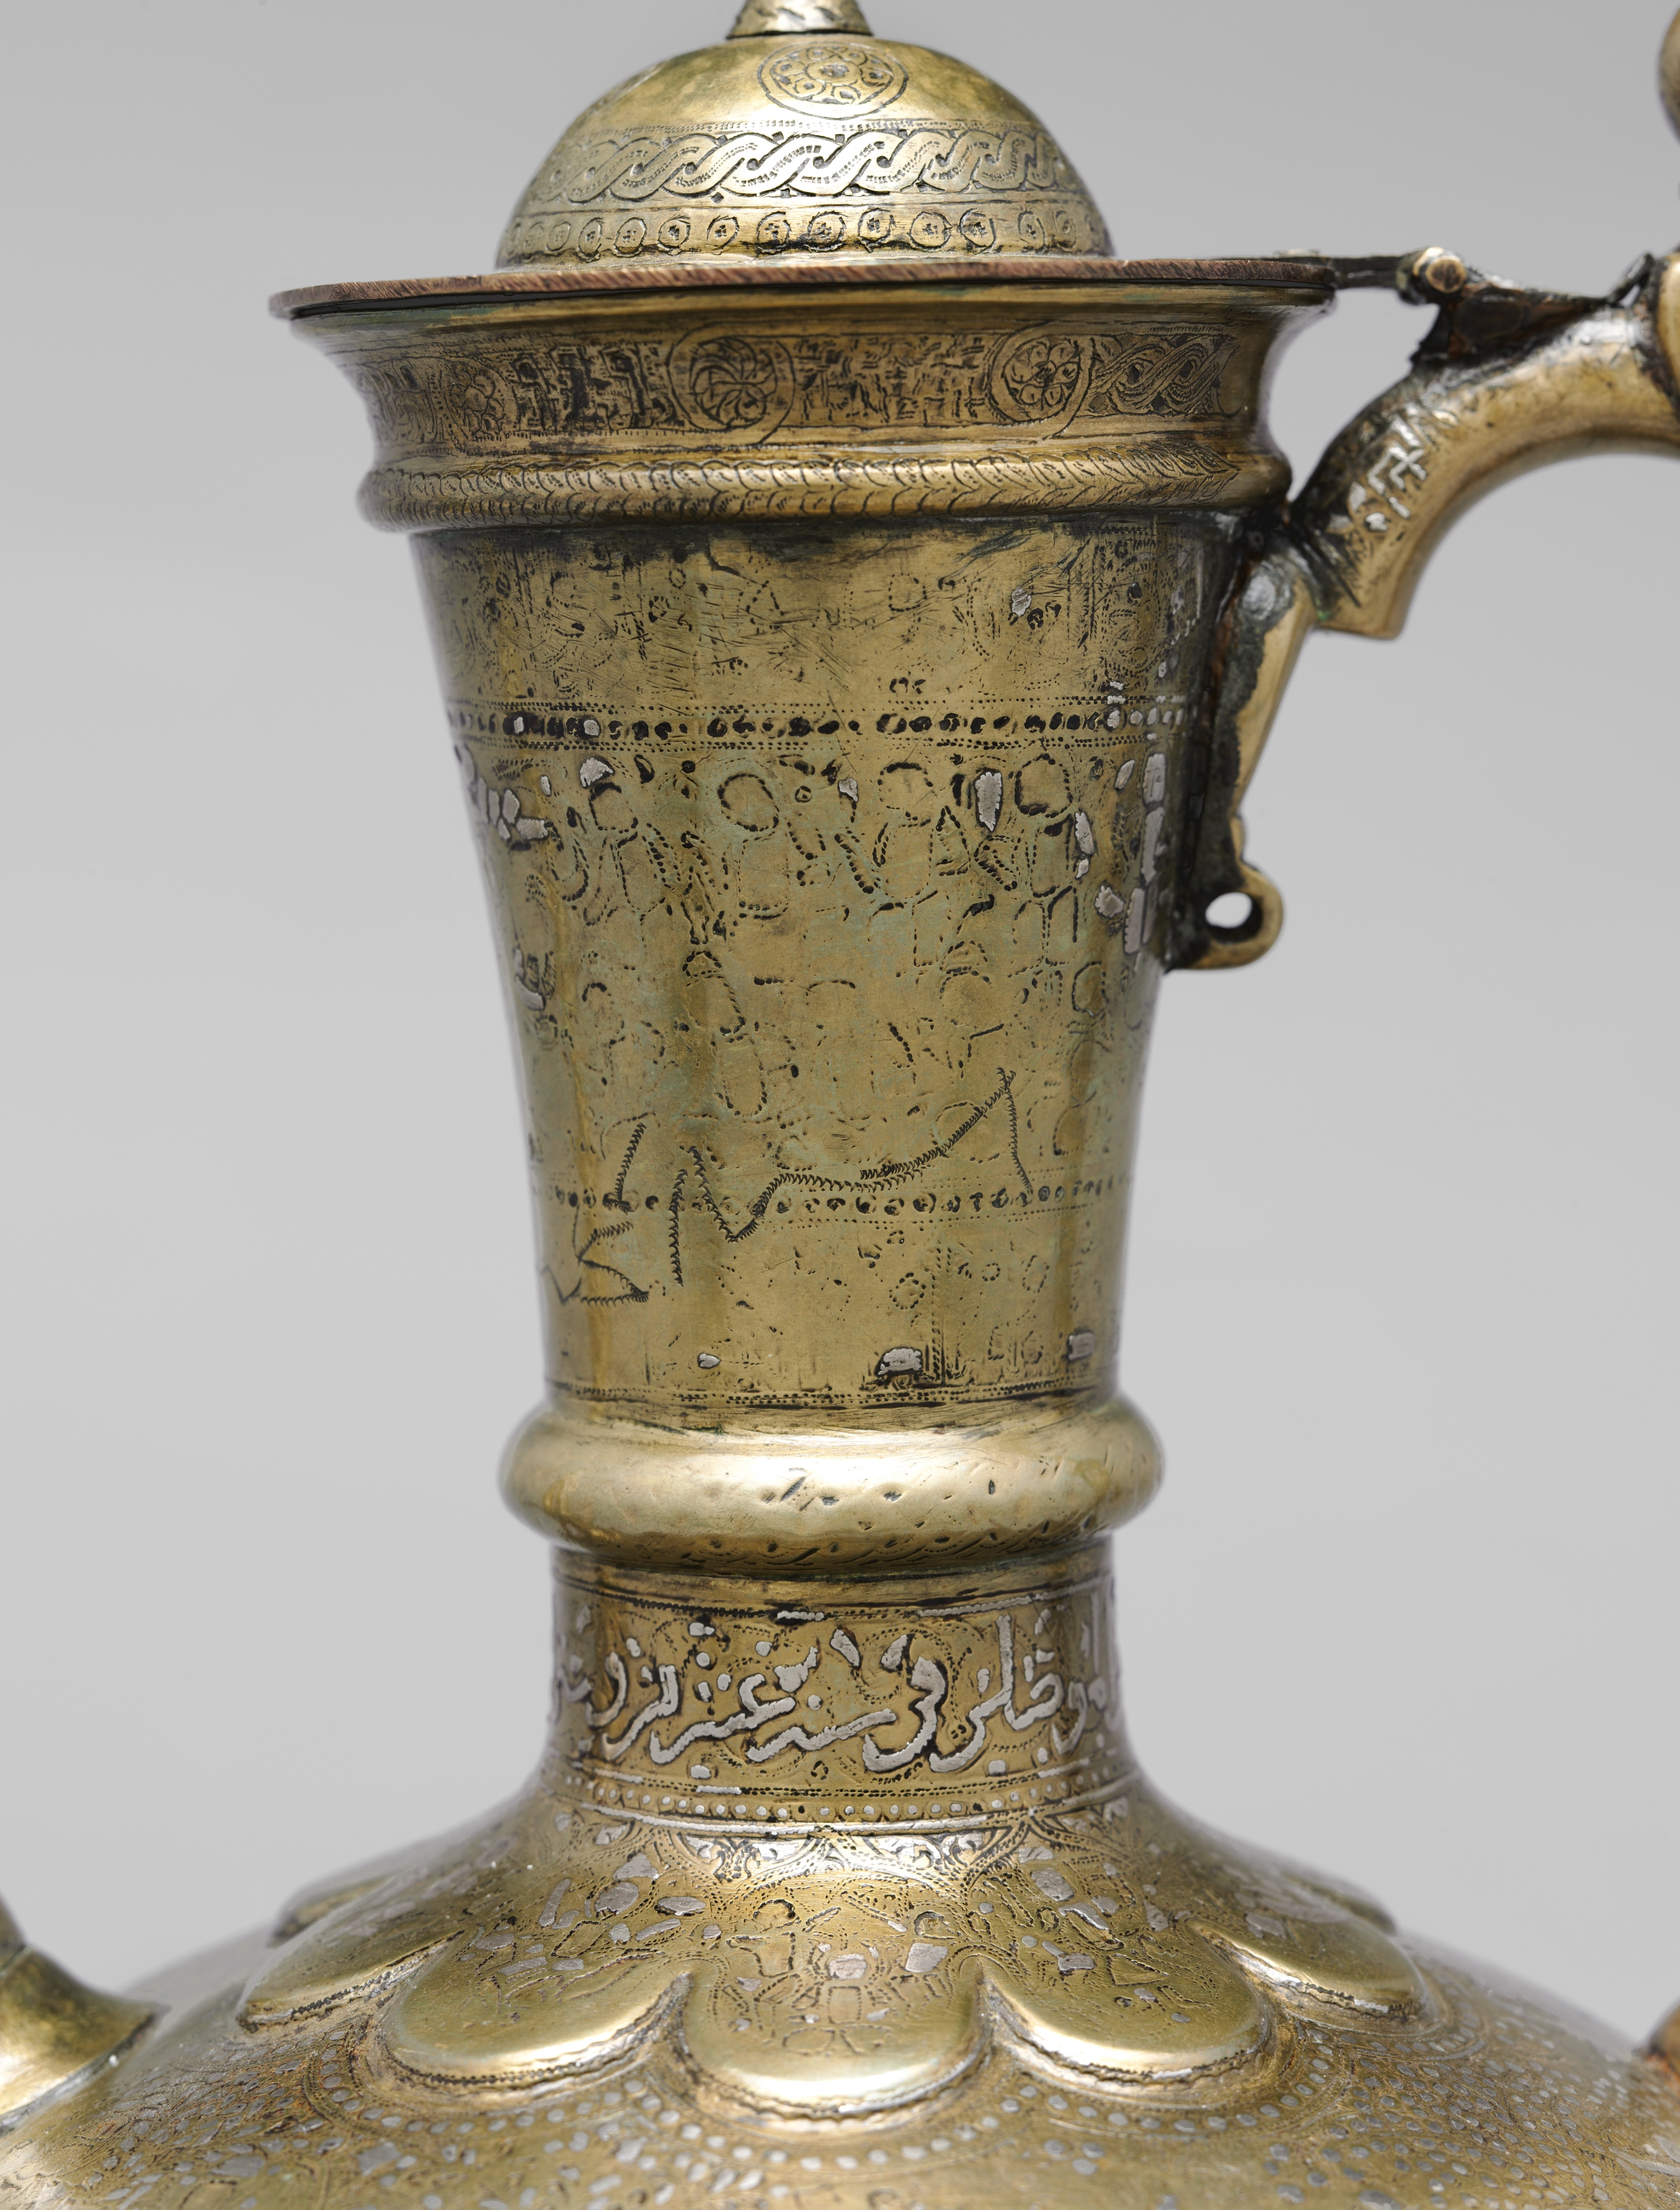 Luxury Ewer Extending Good Fortune to the Owner Iraq, possibly Mosul,  Zangid or Artugid Period, 13th Century